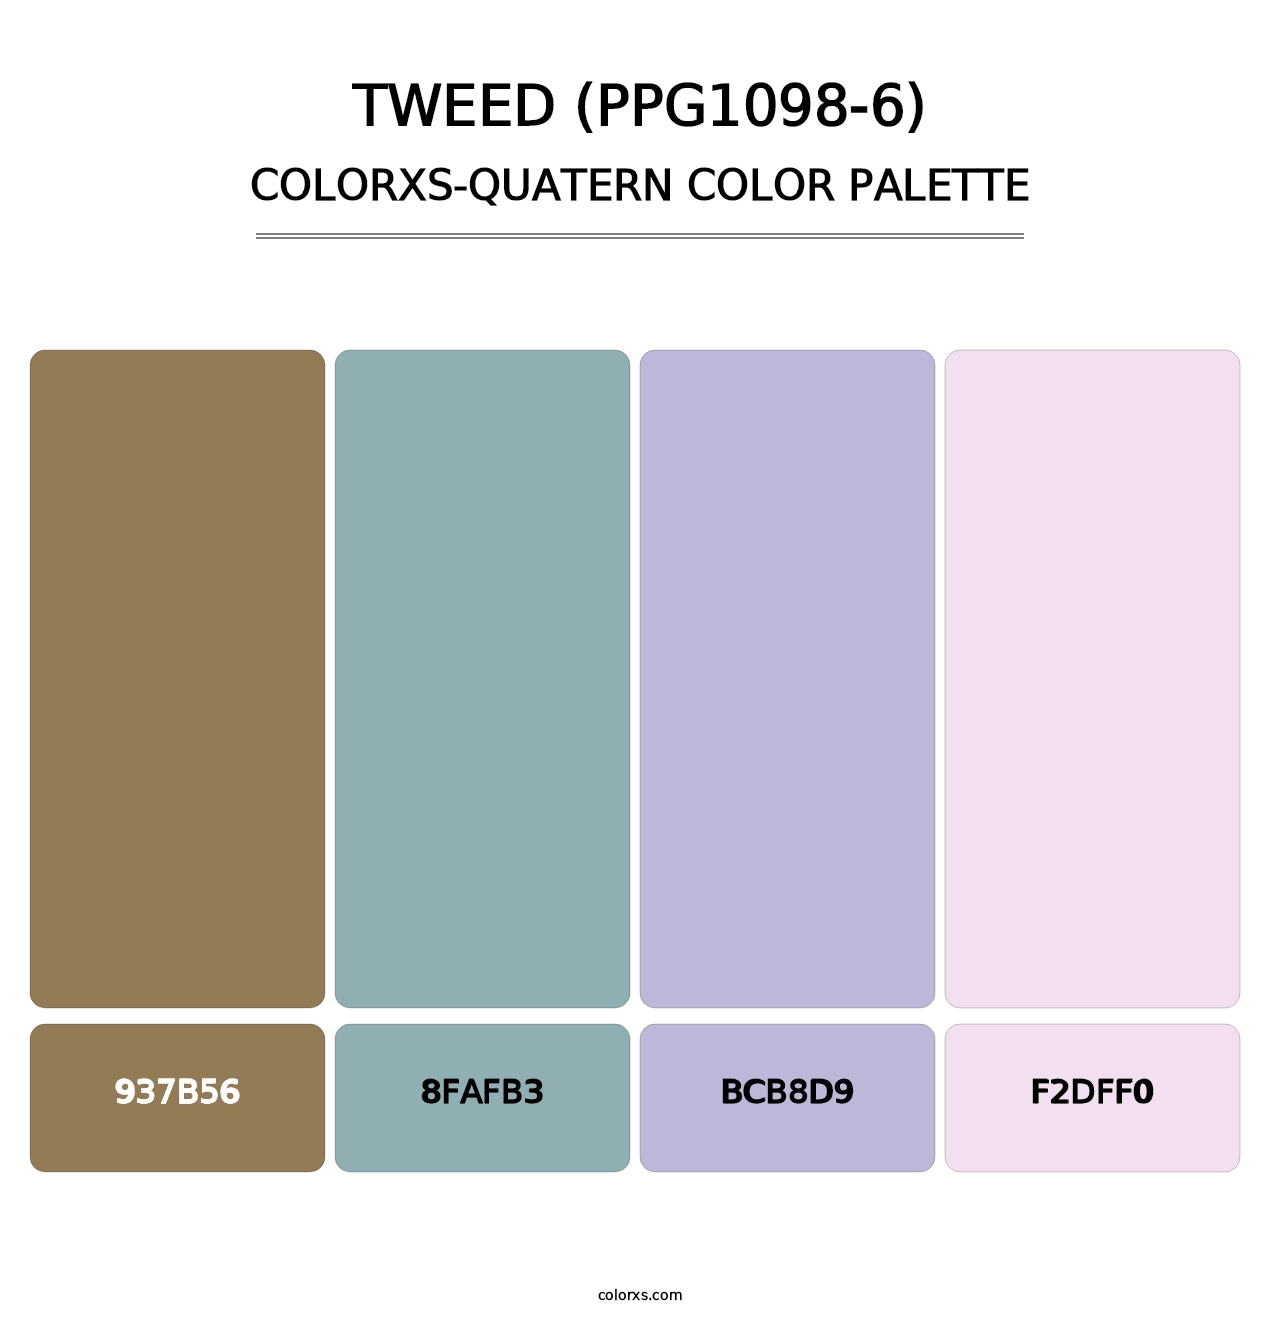 Tweed (PPG1098-6) - Colorxs Quatern Palette